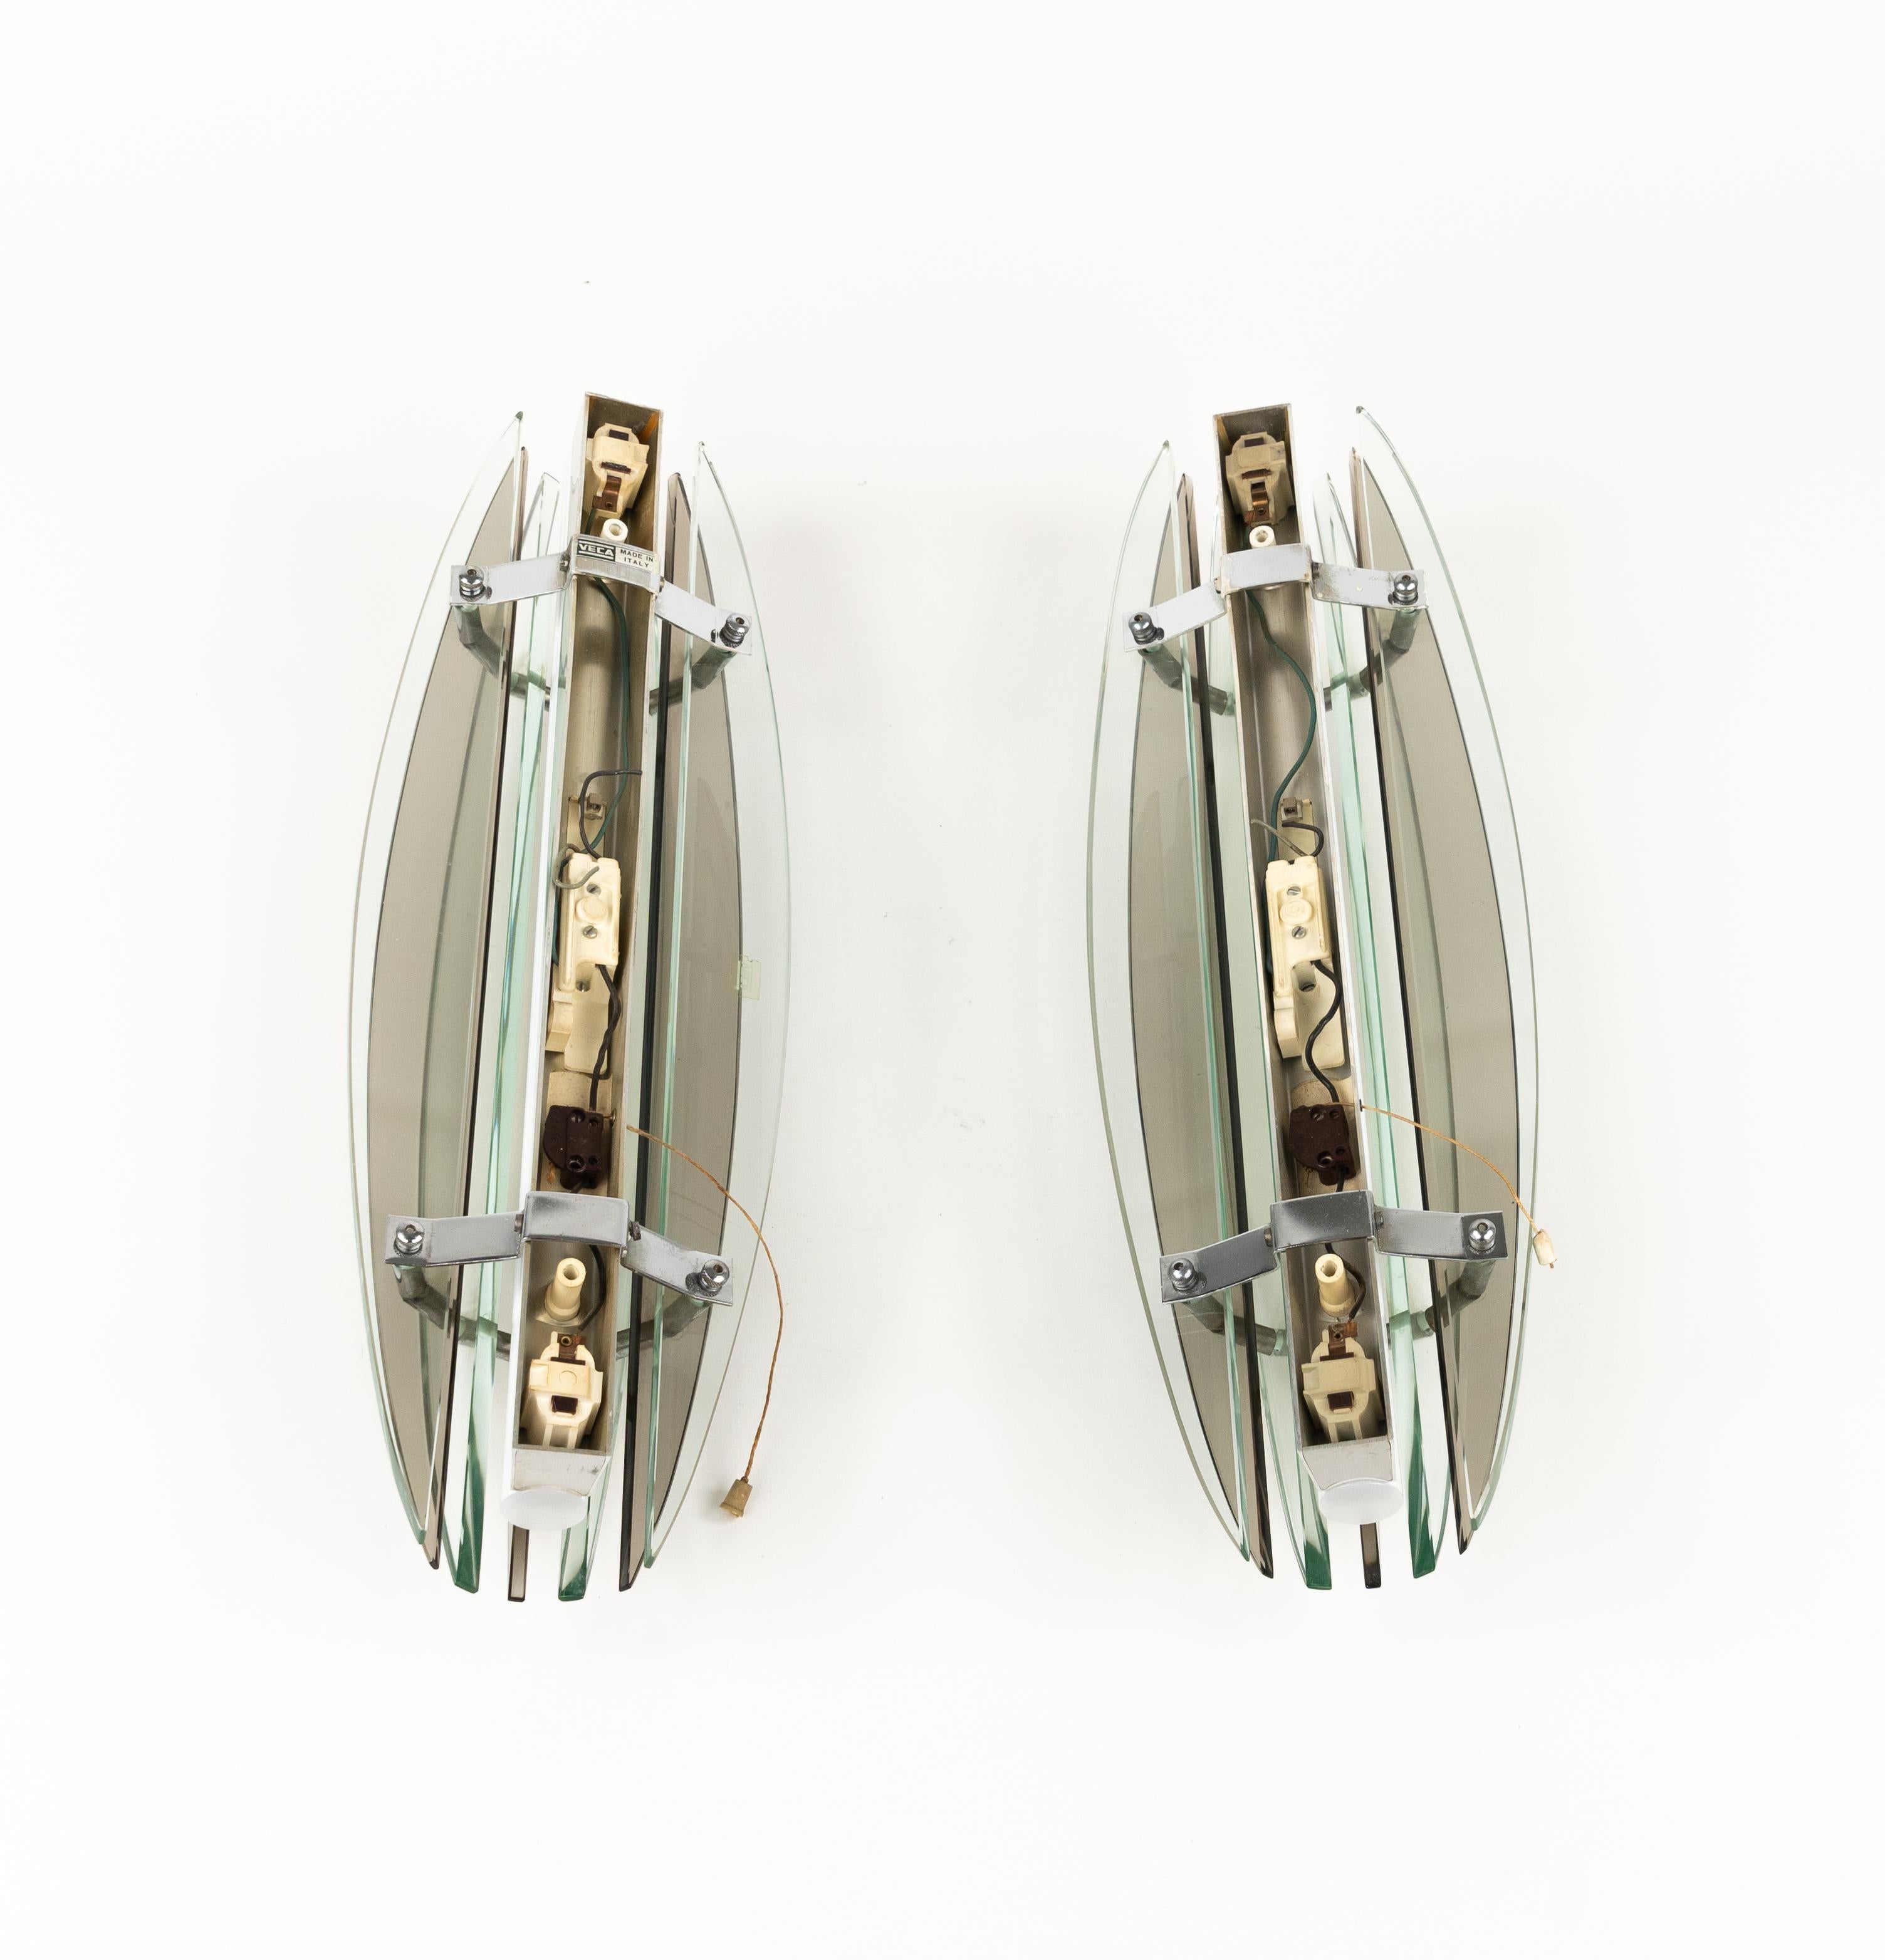 Midcentury Large Pair of Sconces in Colored Glass & Chrome by Veca, Italy, 1970s For Sale 9